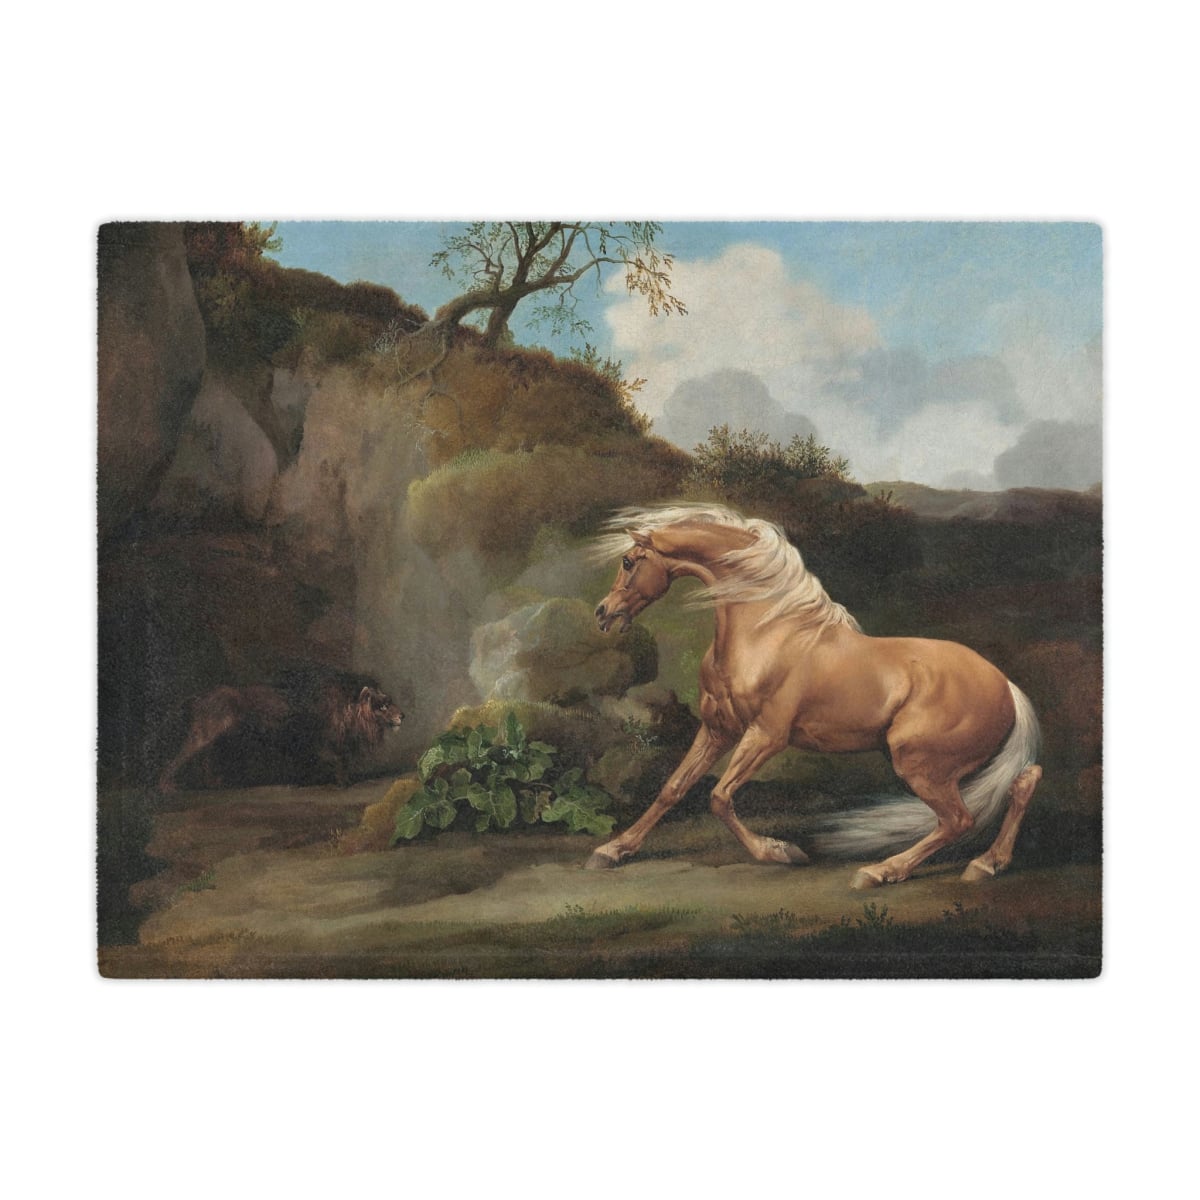 Artistic Blanket with Iconic George Stubbs Artwork